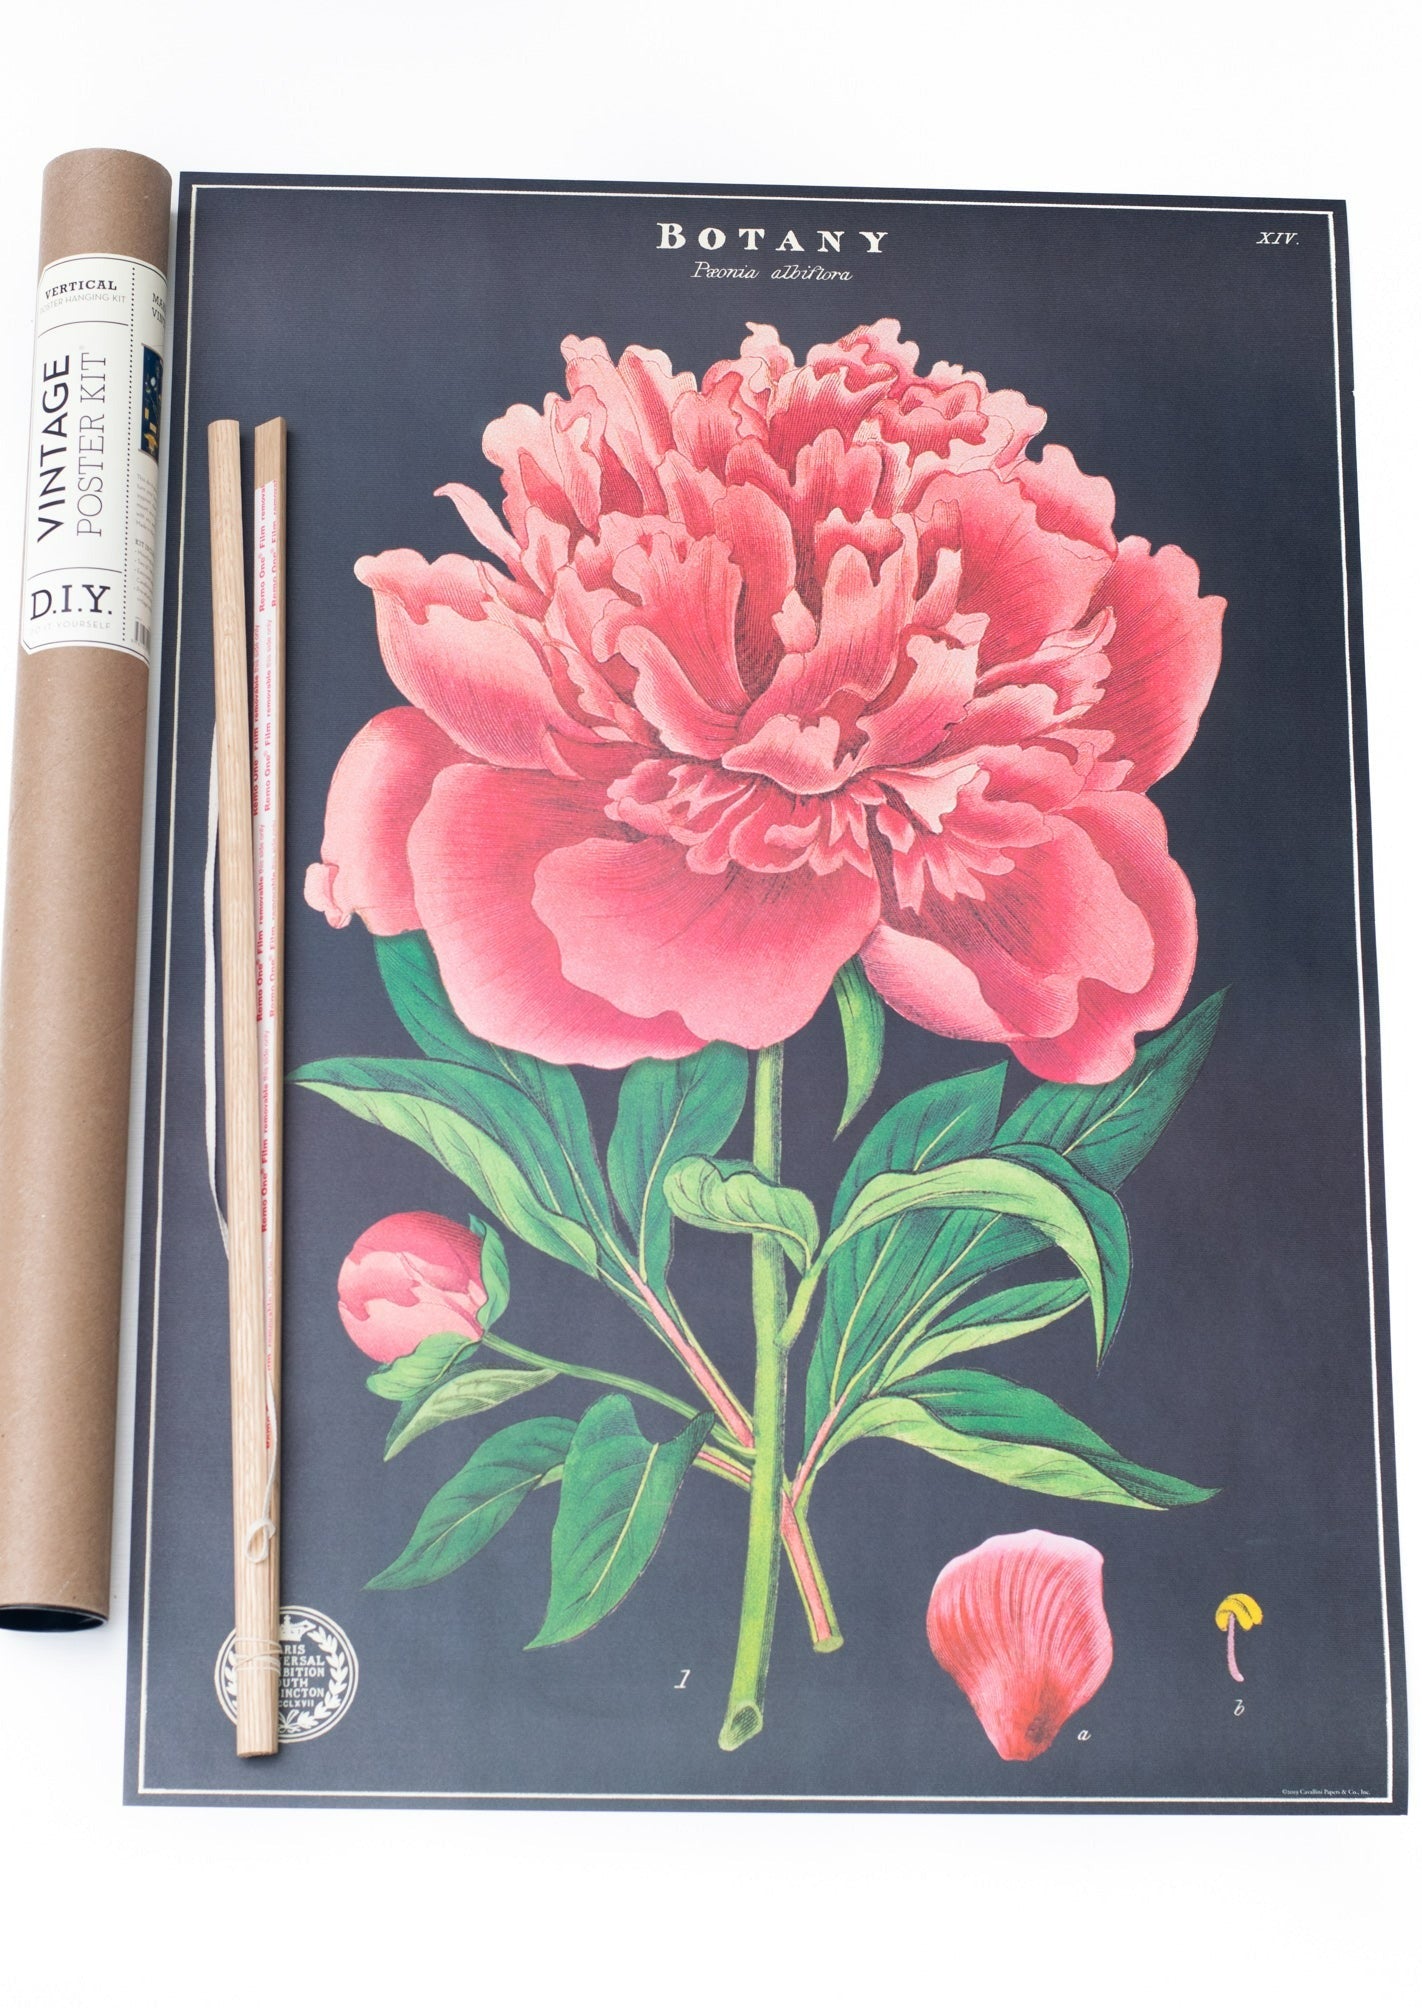 Botany Peony Vintage Home Decor Hanging Picture